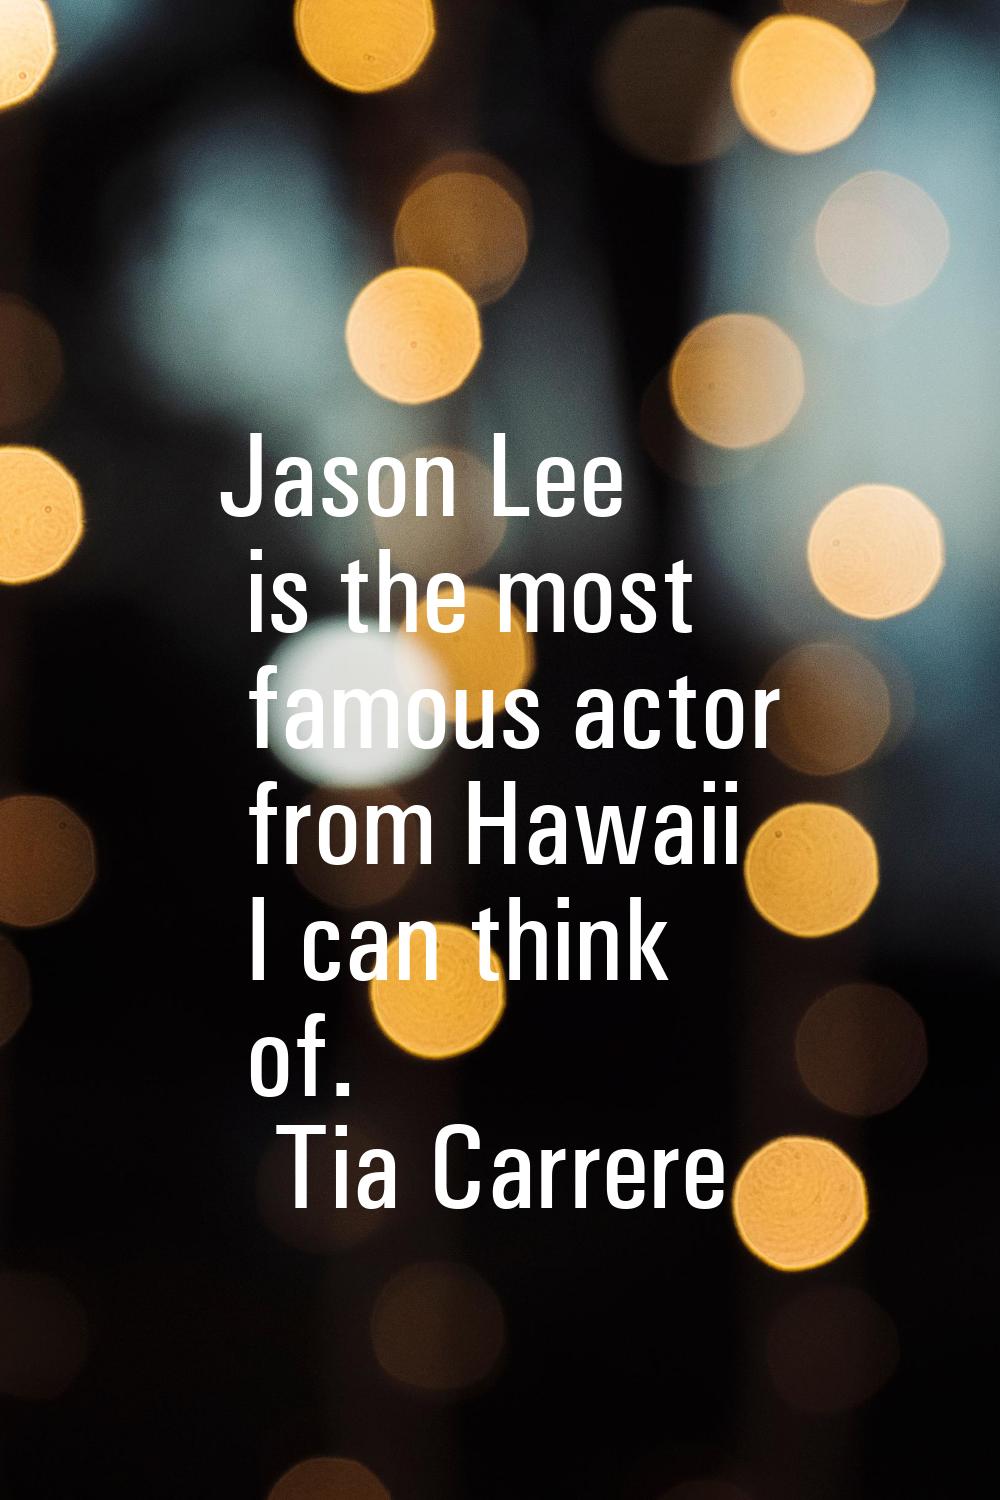 Jason Lee is the most famous actor from Hawaii I can think of.